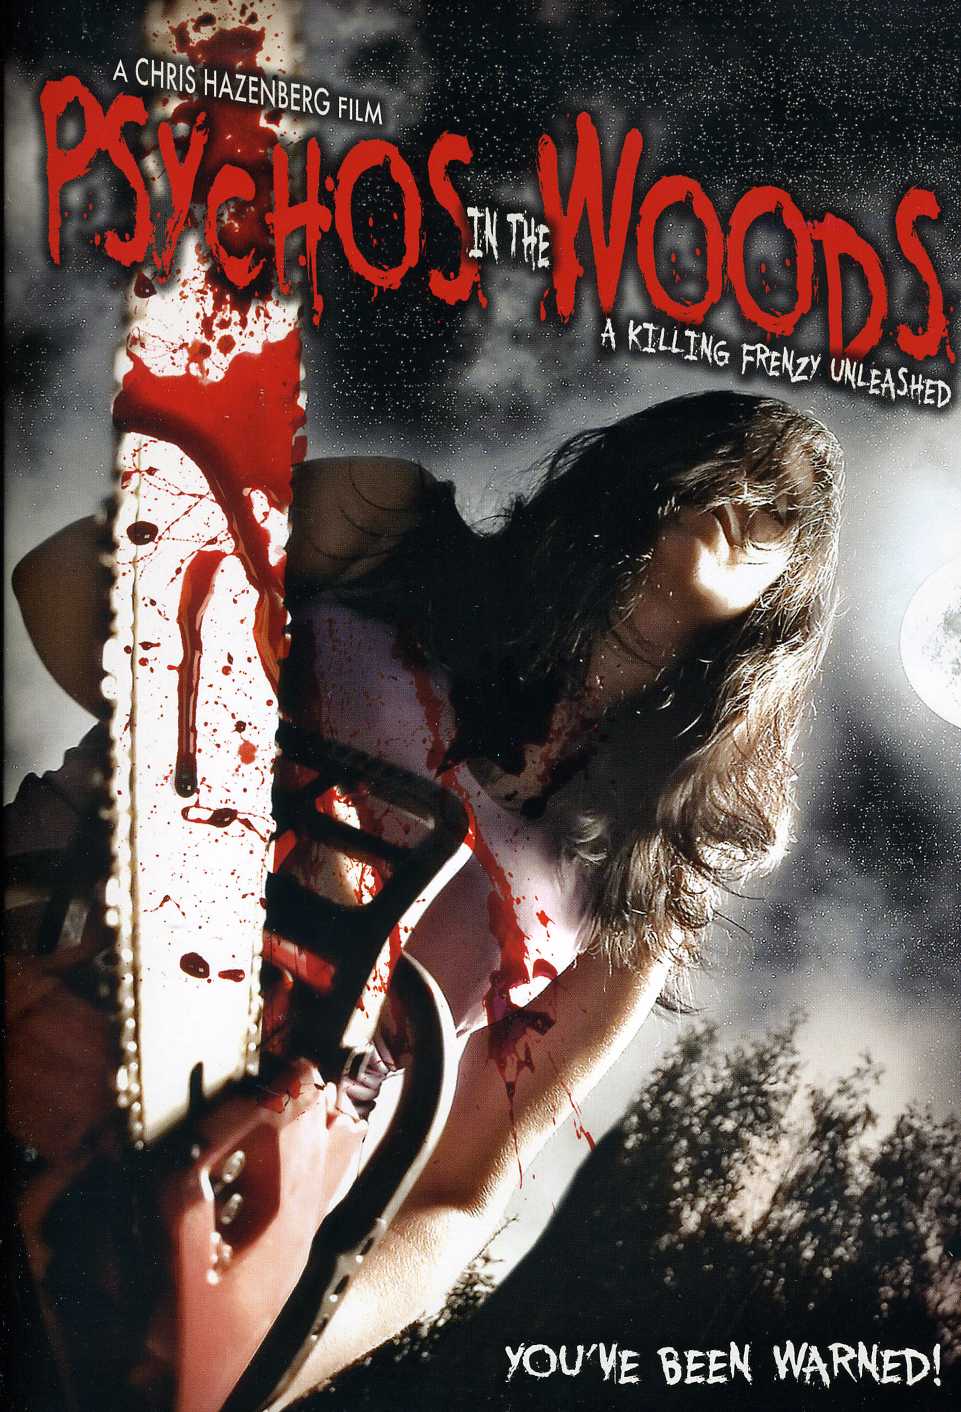 PSYCHOS IN THE WOODS: A KILLING FRENZY UNLEASHED